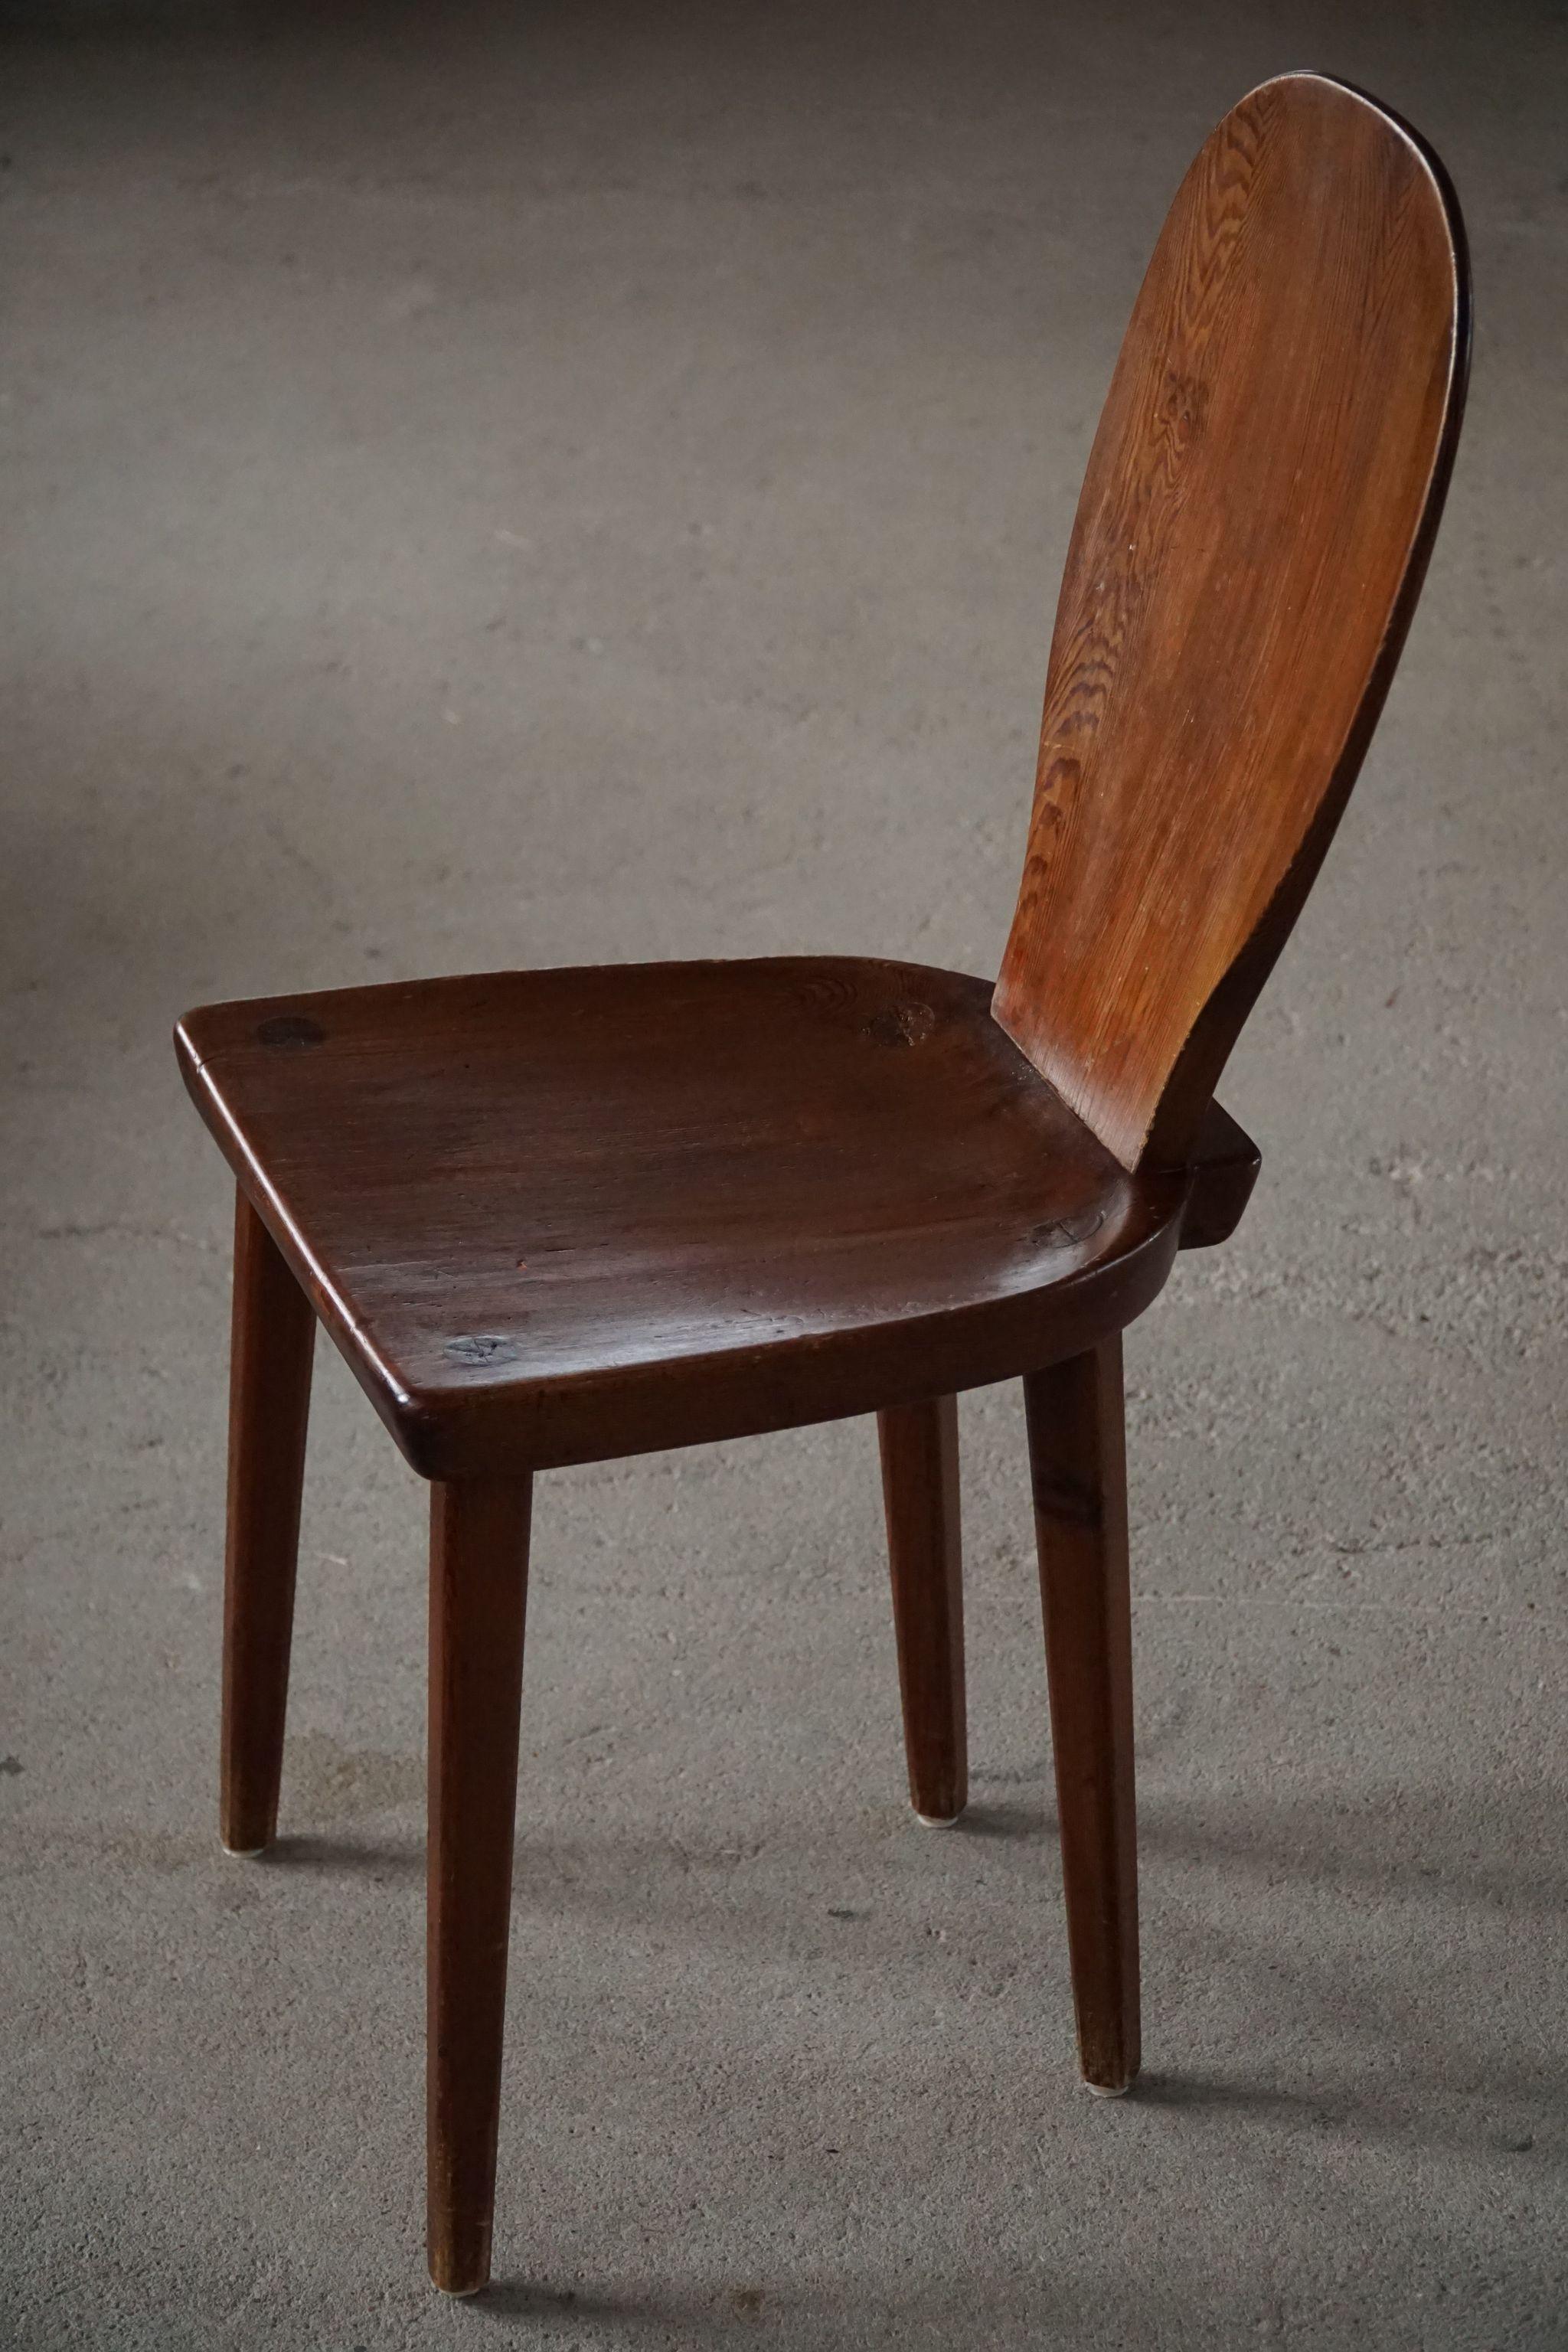 A rare dining / office chair in stained pine. Designed by Carl Malmsten in 1930s. Model 